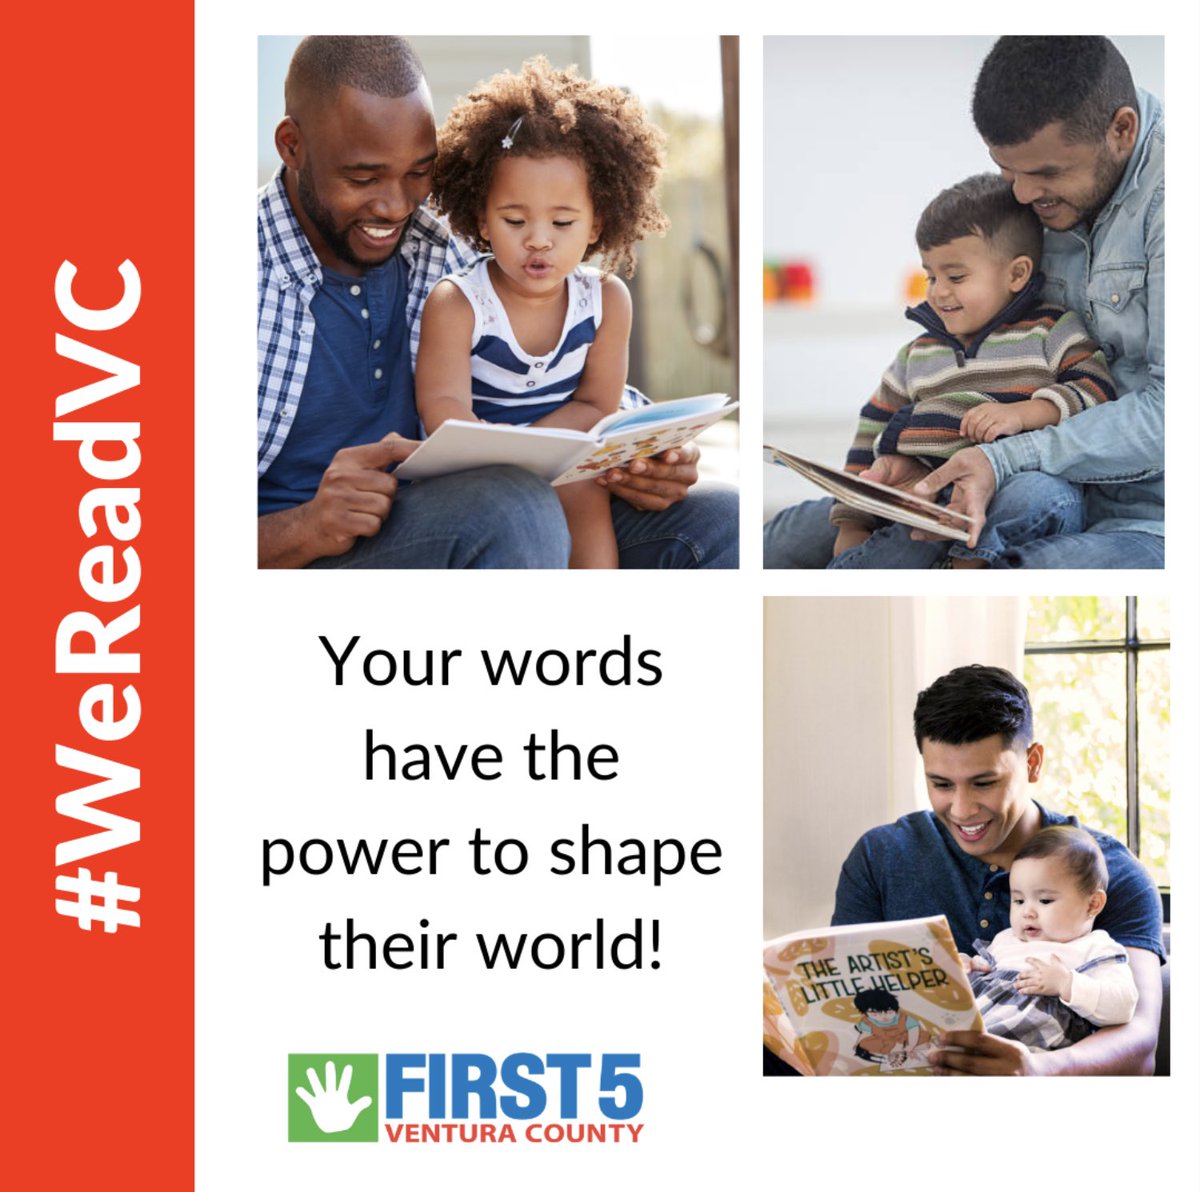 The most powerful ways to develop children’s literacy skills are also the simplest - Talk, Read, Sing every day! You will be planting seeds of knowledge that help kids grow into curious thinkers, readers, and writers. ❤️📚
Learn more at: pbs.org/parents/learn-…
#Take5VC #WeReadVC